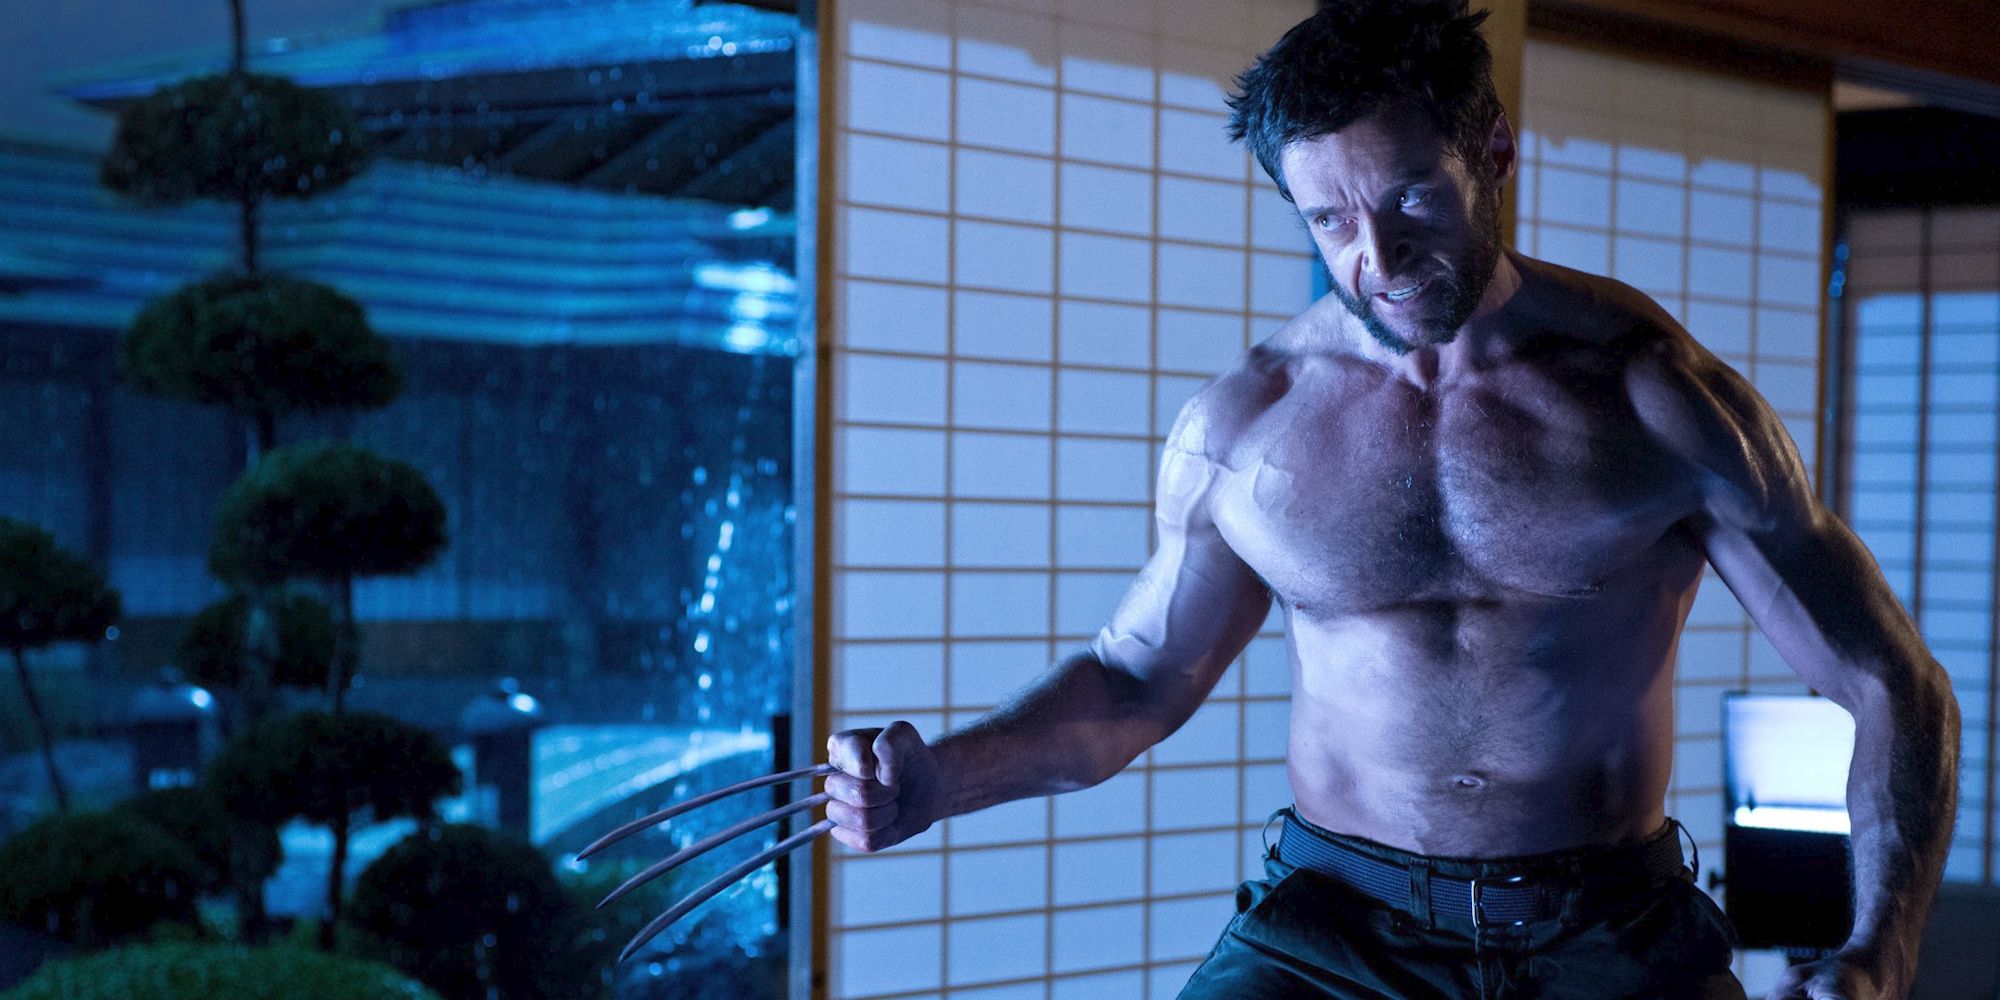 Hugh Jackman as Wolverine bearing his claws shirtless in The Wolverine.